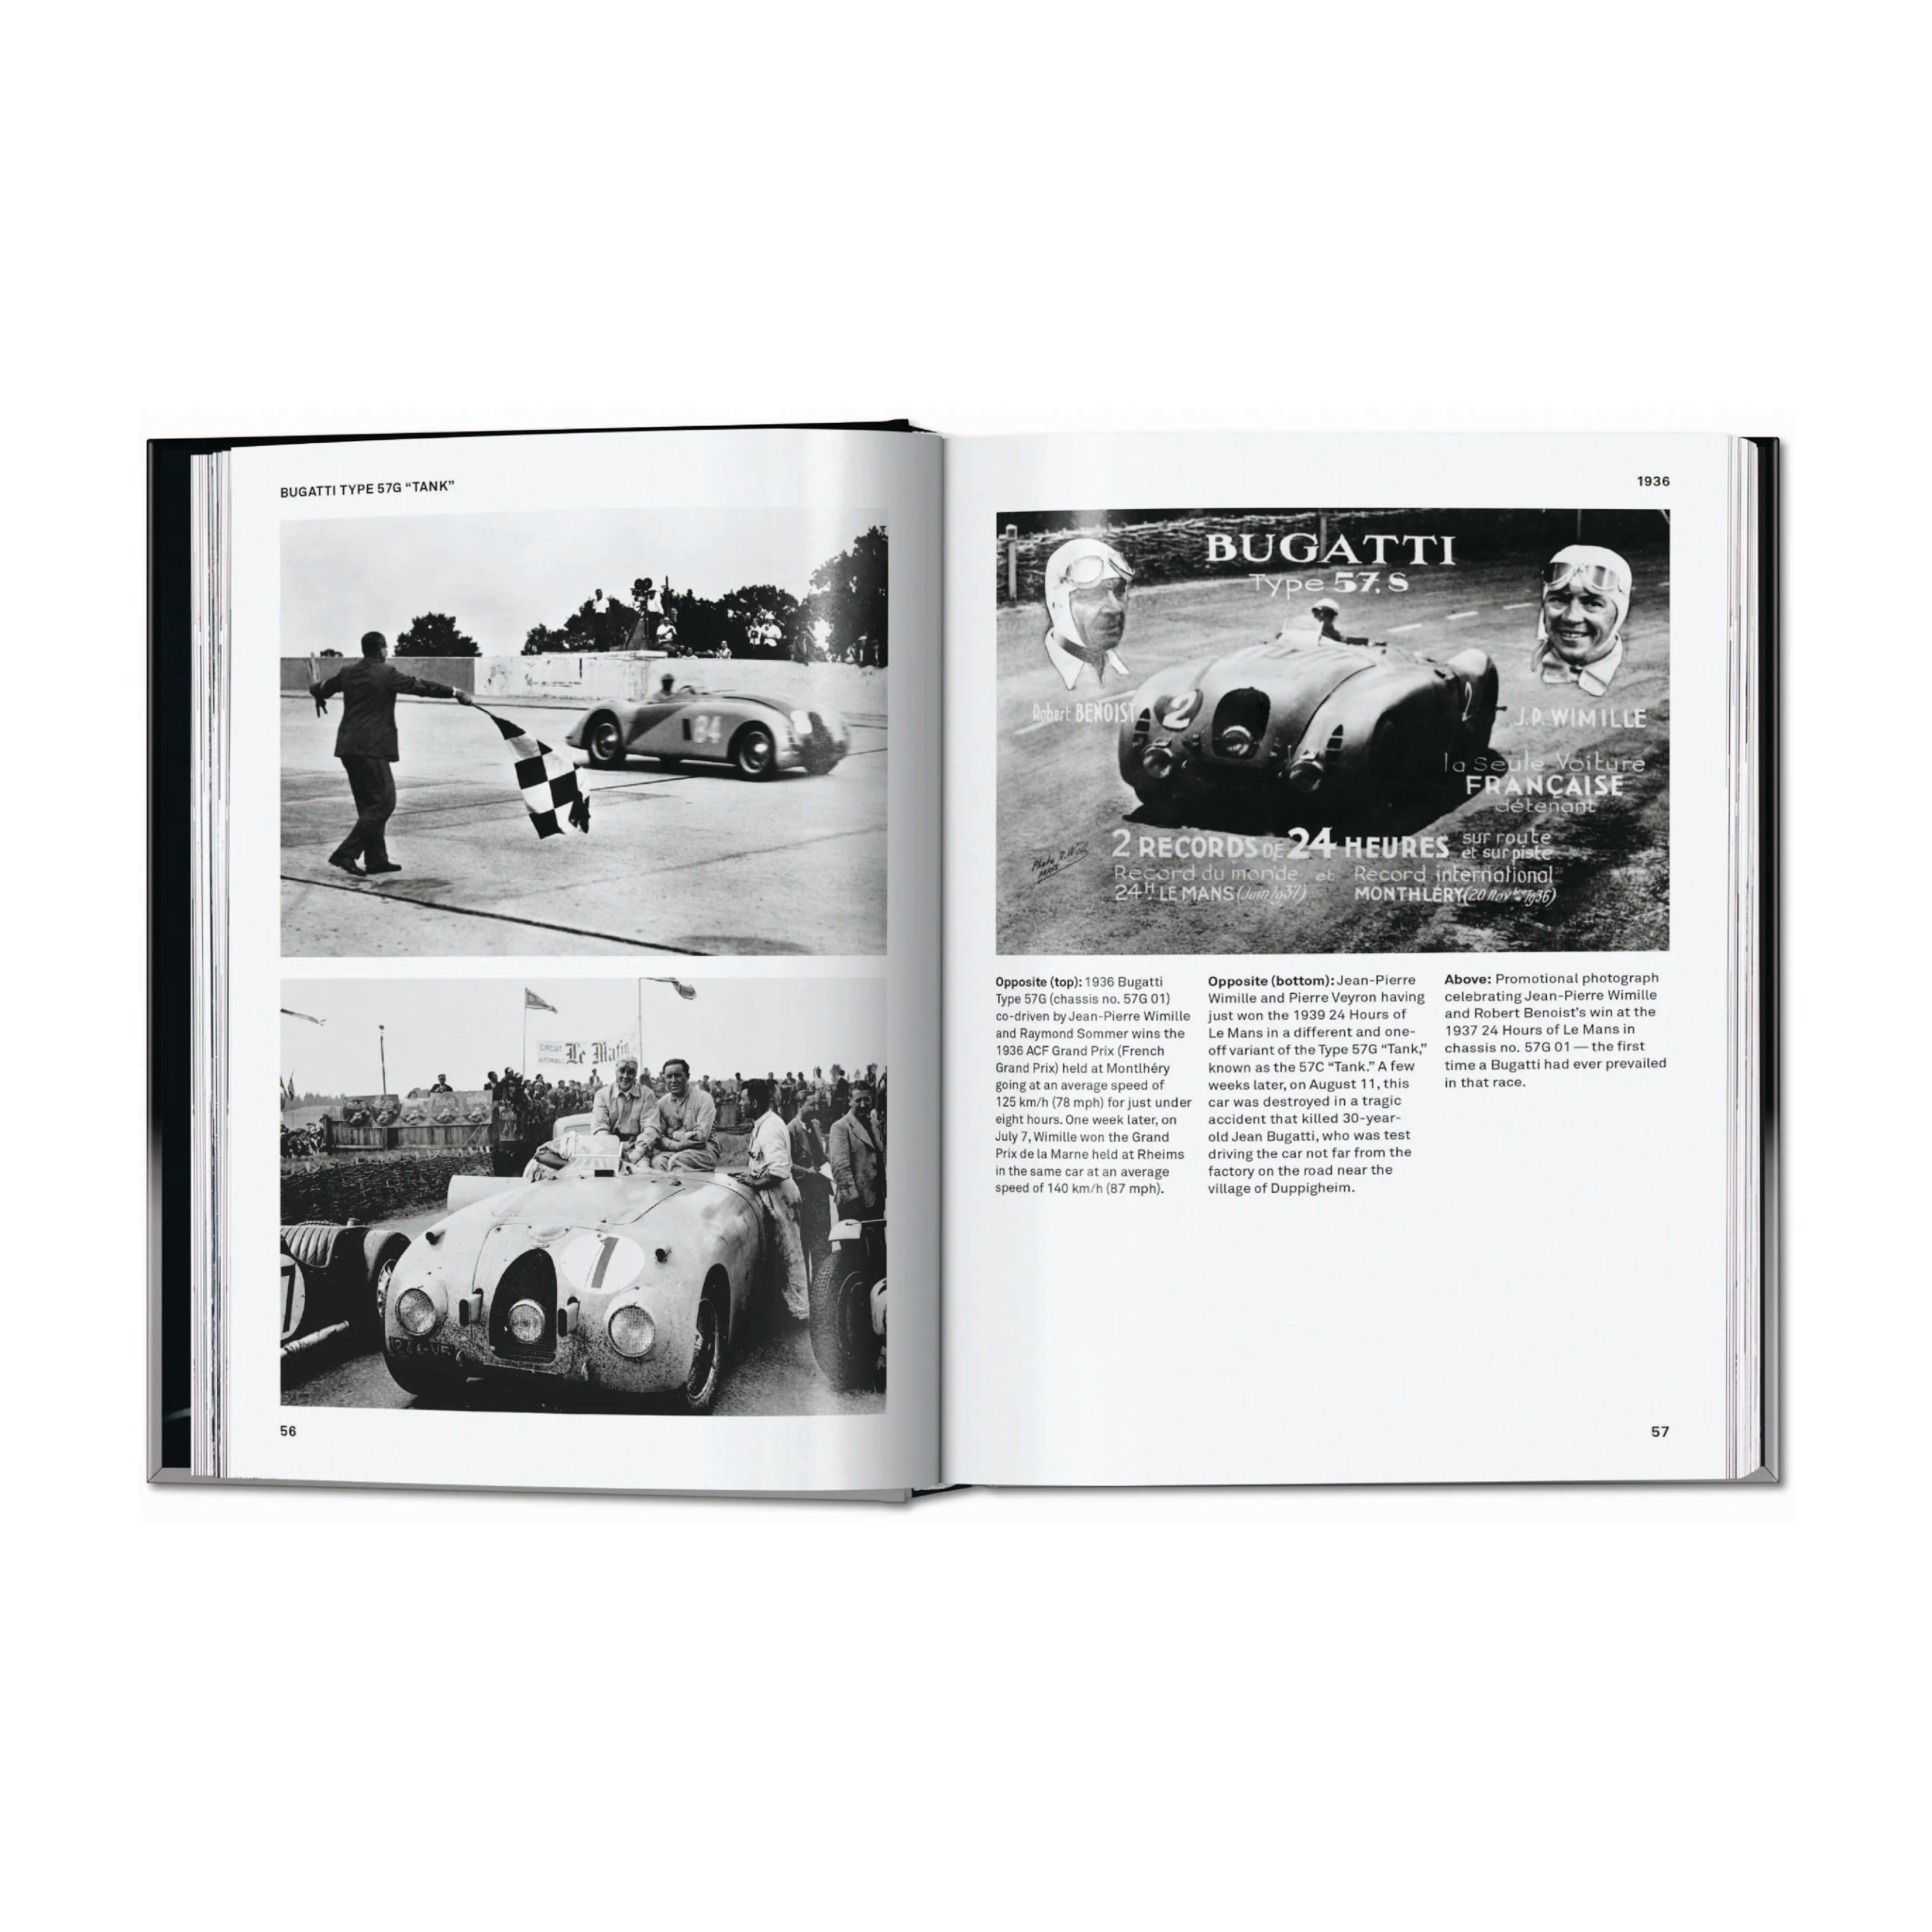 50 Ultimate Sports Cars. 40th Ed. - Hardcover